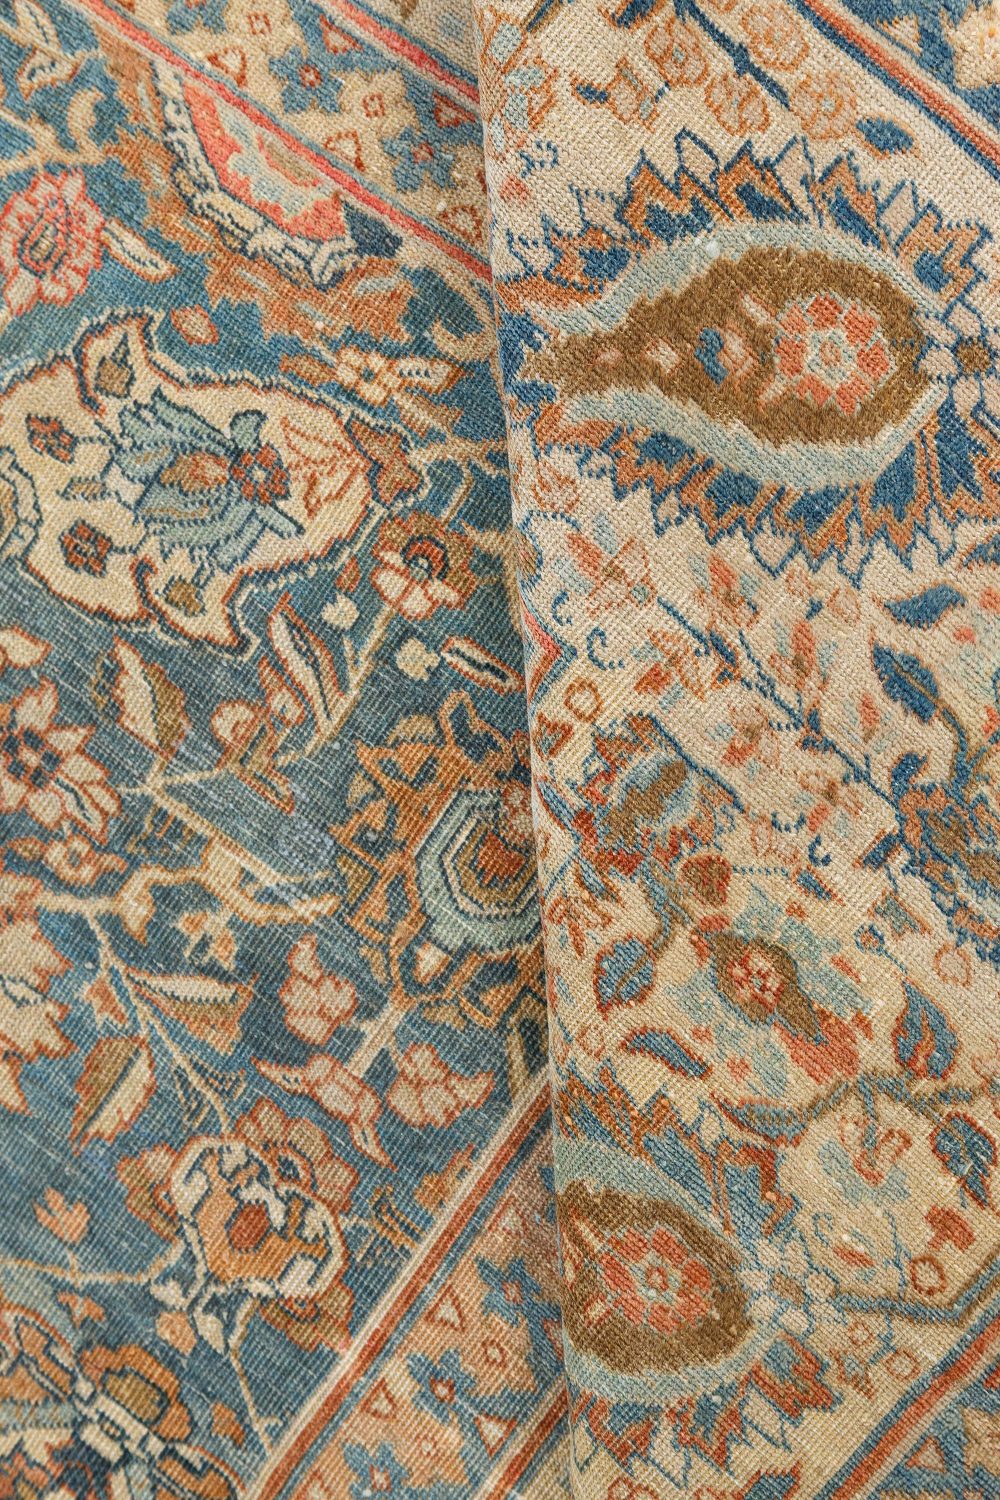 Antique Persian Tabriz Rug in Blue and Brown BB7483